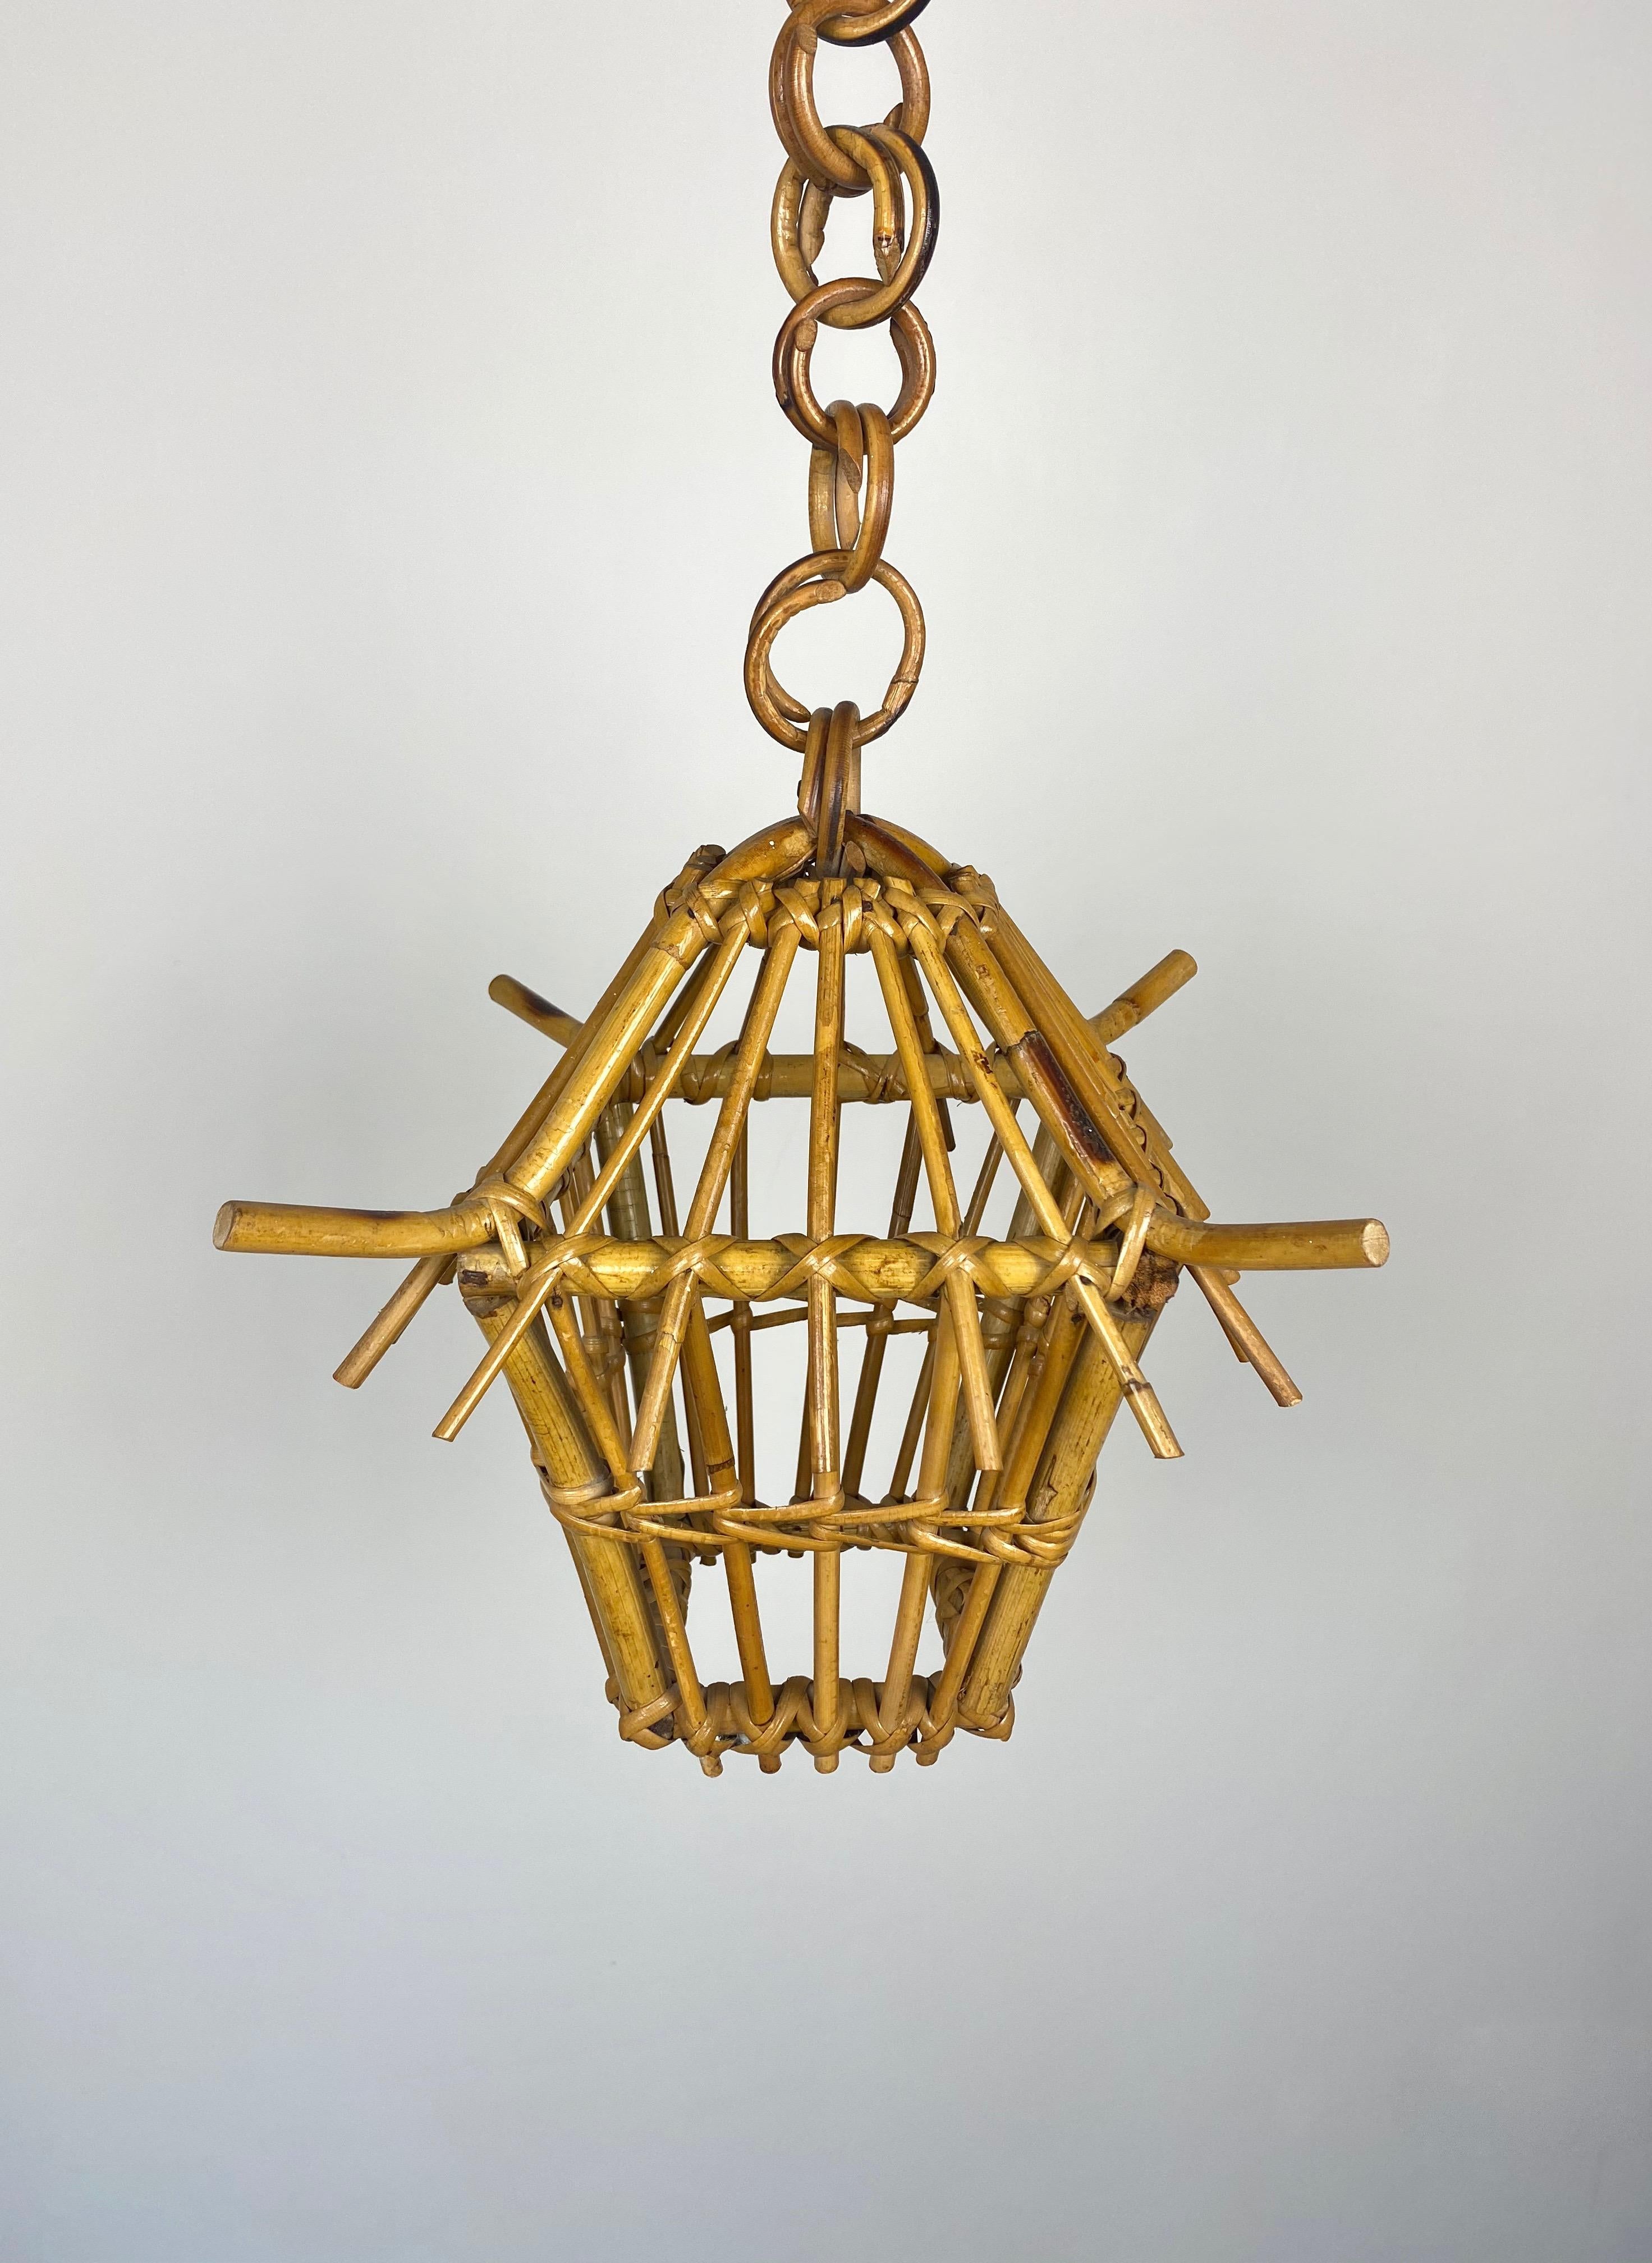 Chandelier pendant lantern shaped in bamboo and rattan. Made in Italy, circa 1960.